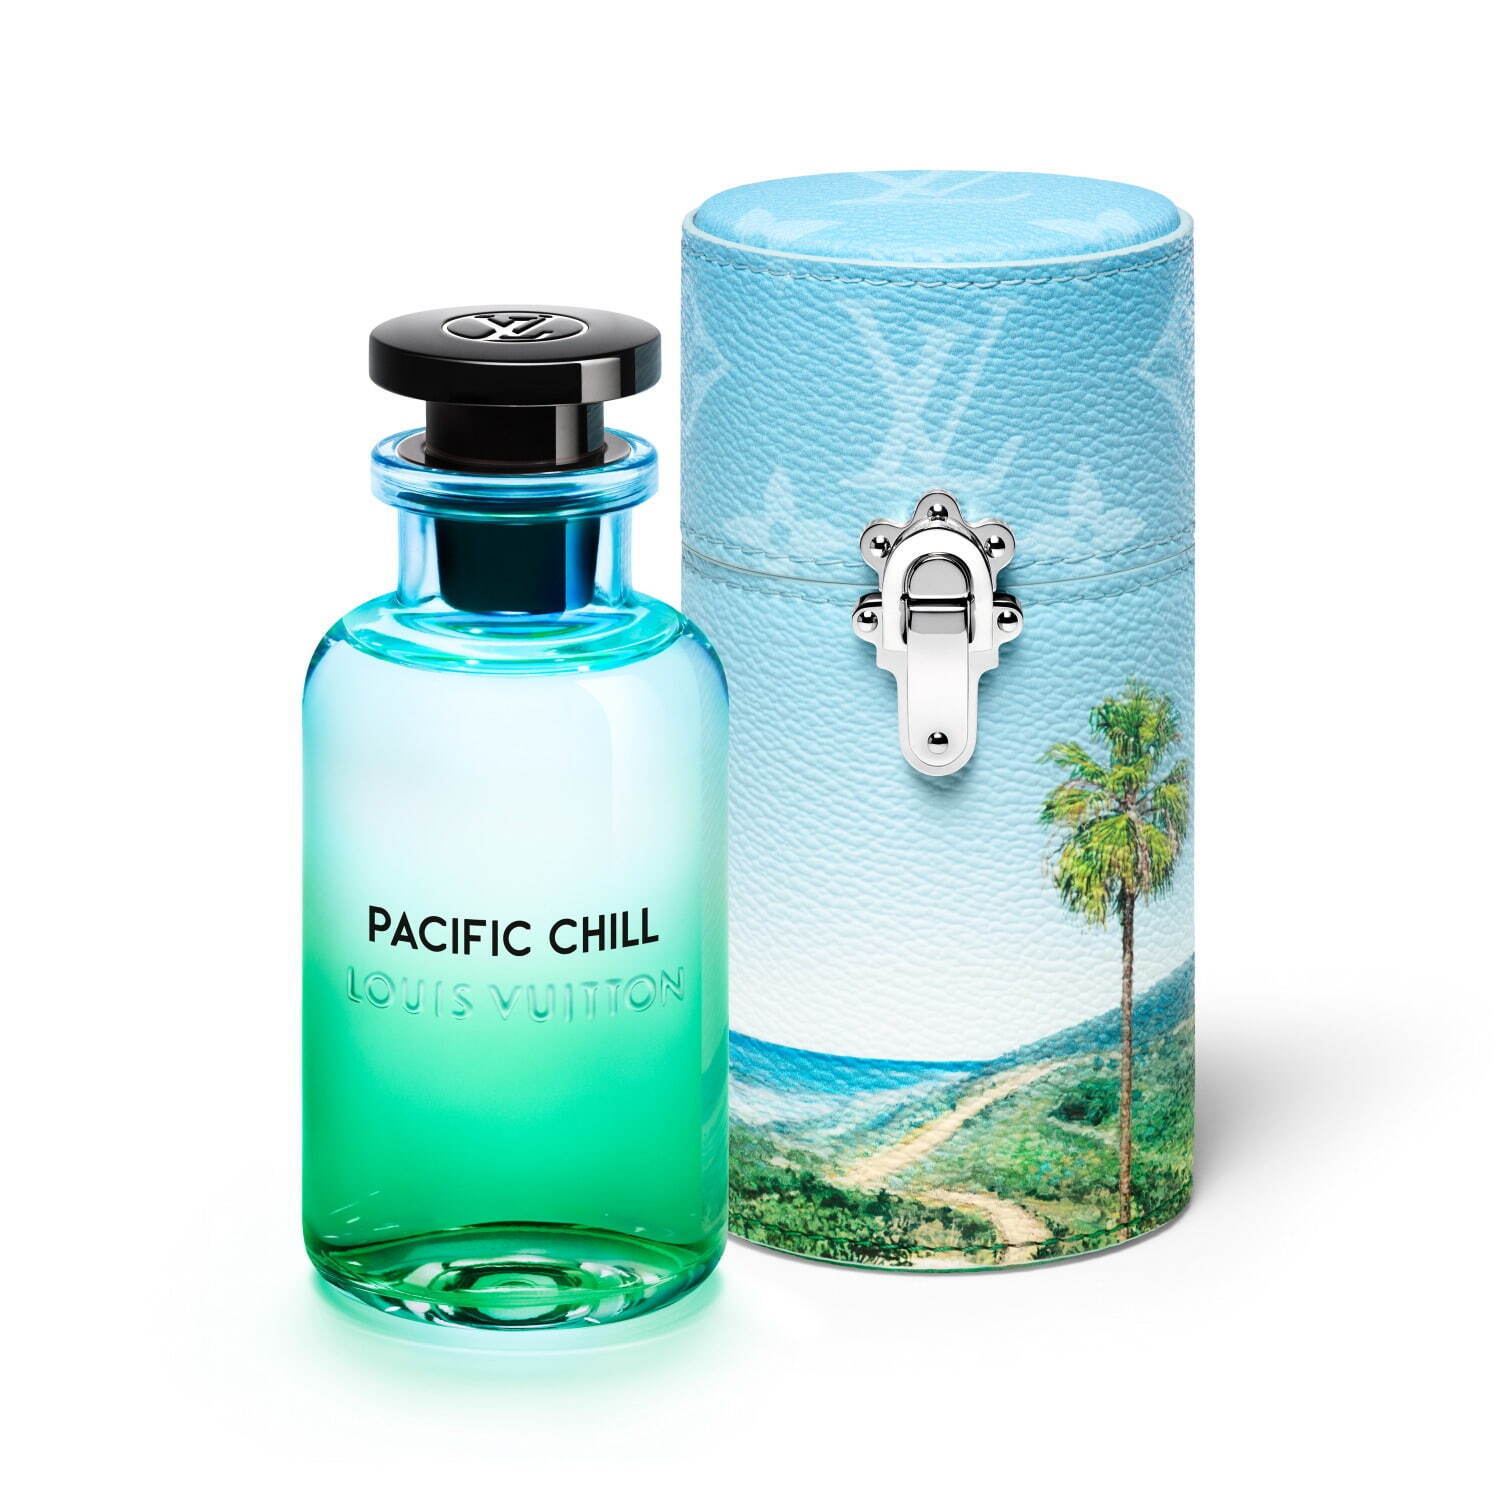 Пацифик чил. Pacific Chill Louis Vuitton. Духи Pacific Chill. Луи Виттон Пацифик чил 100. Louis Vuitton Pacific Chill Parfum.